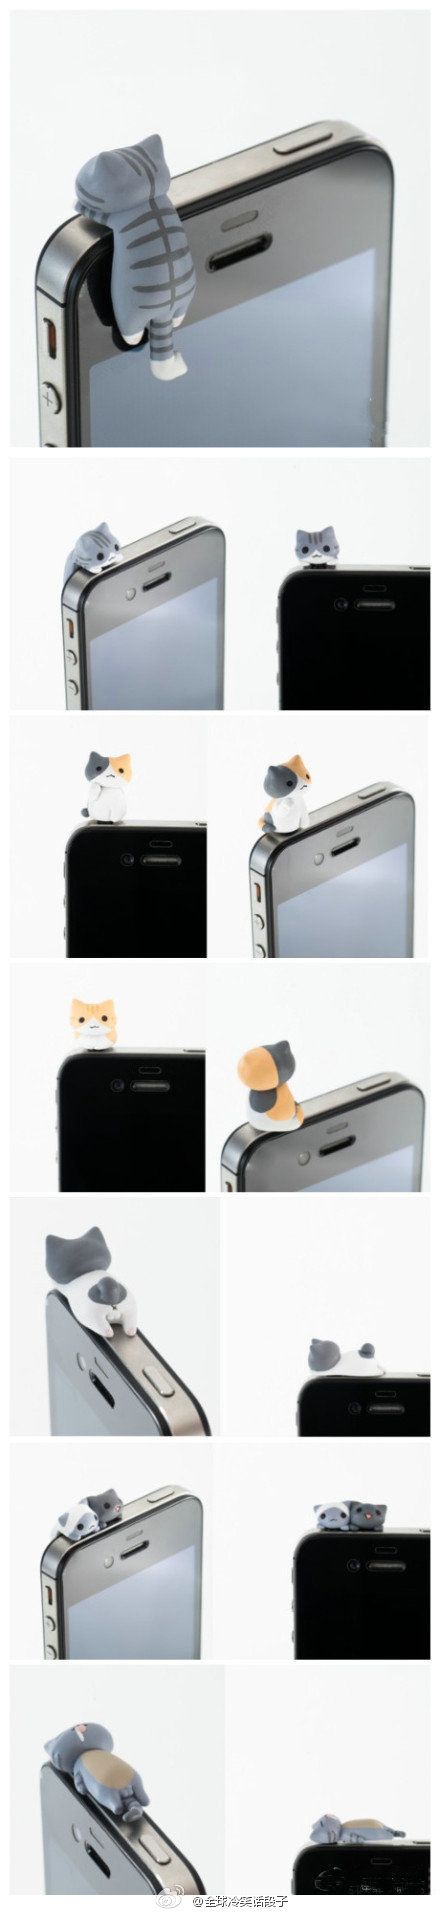 OMG!!!!!! iCat for iPhone